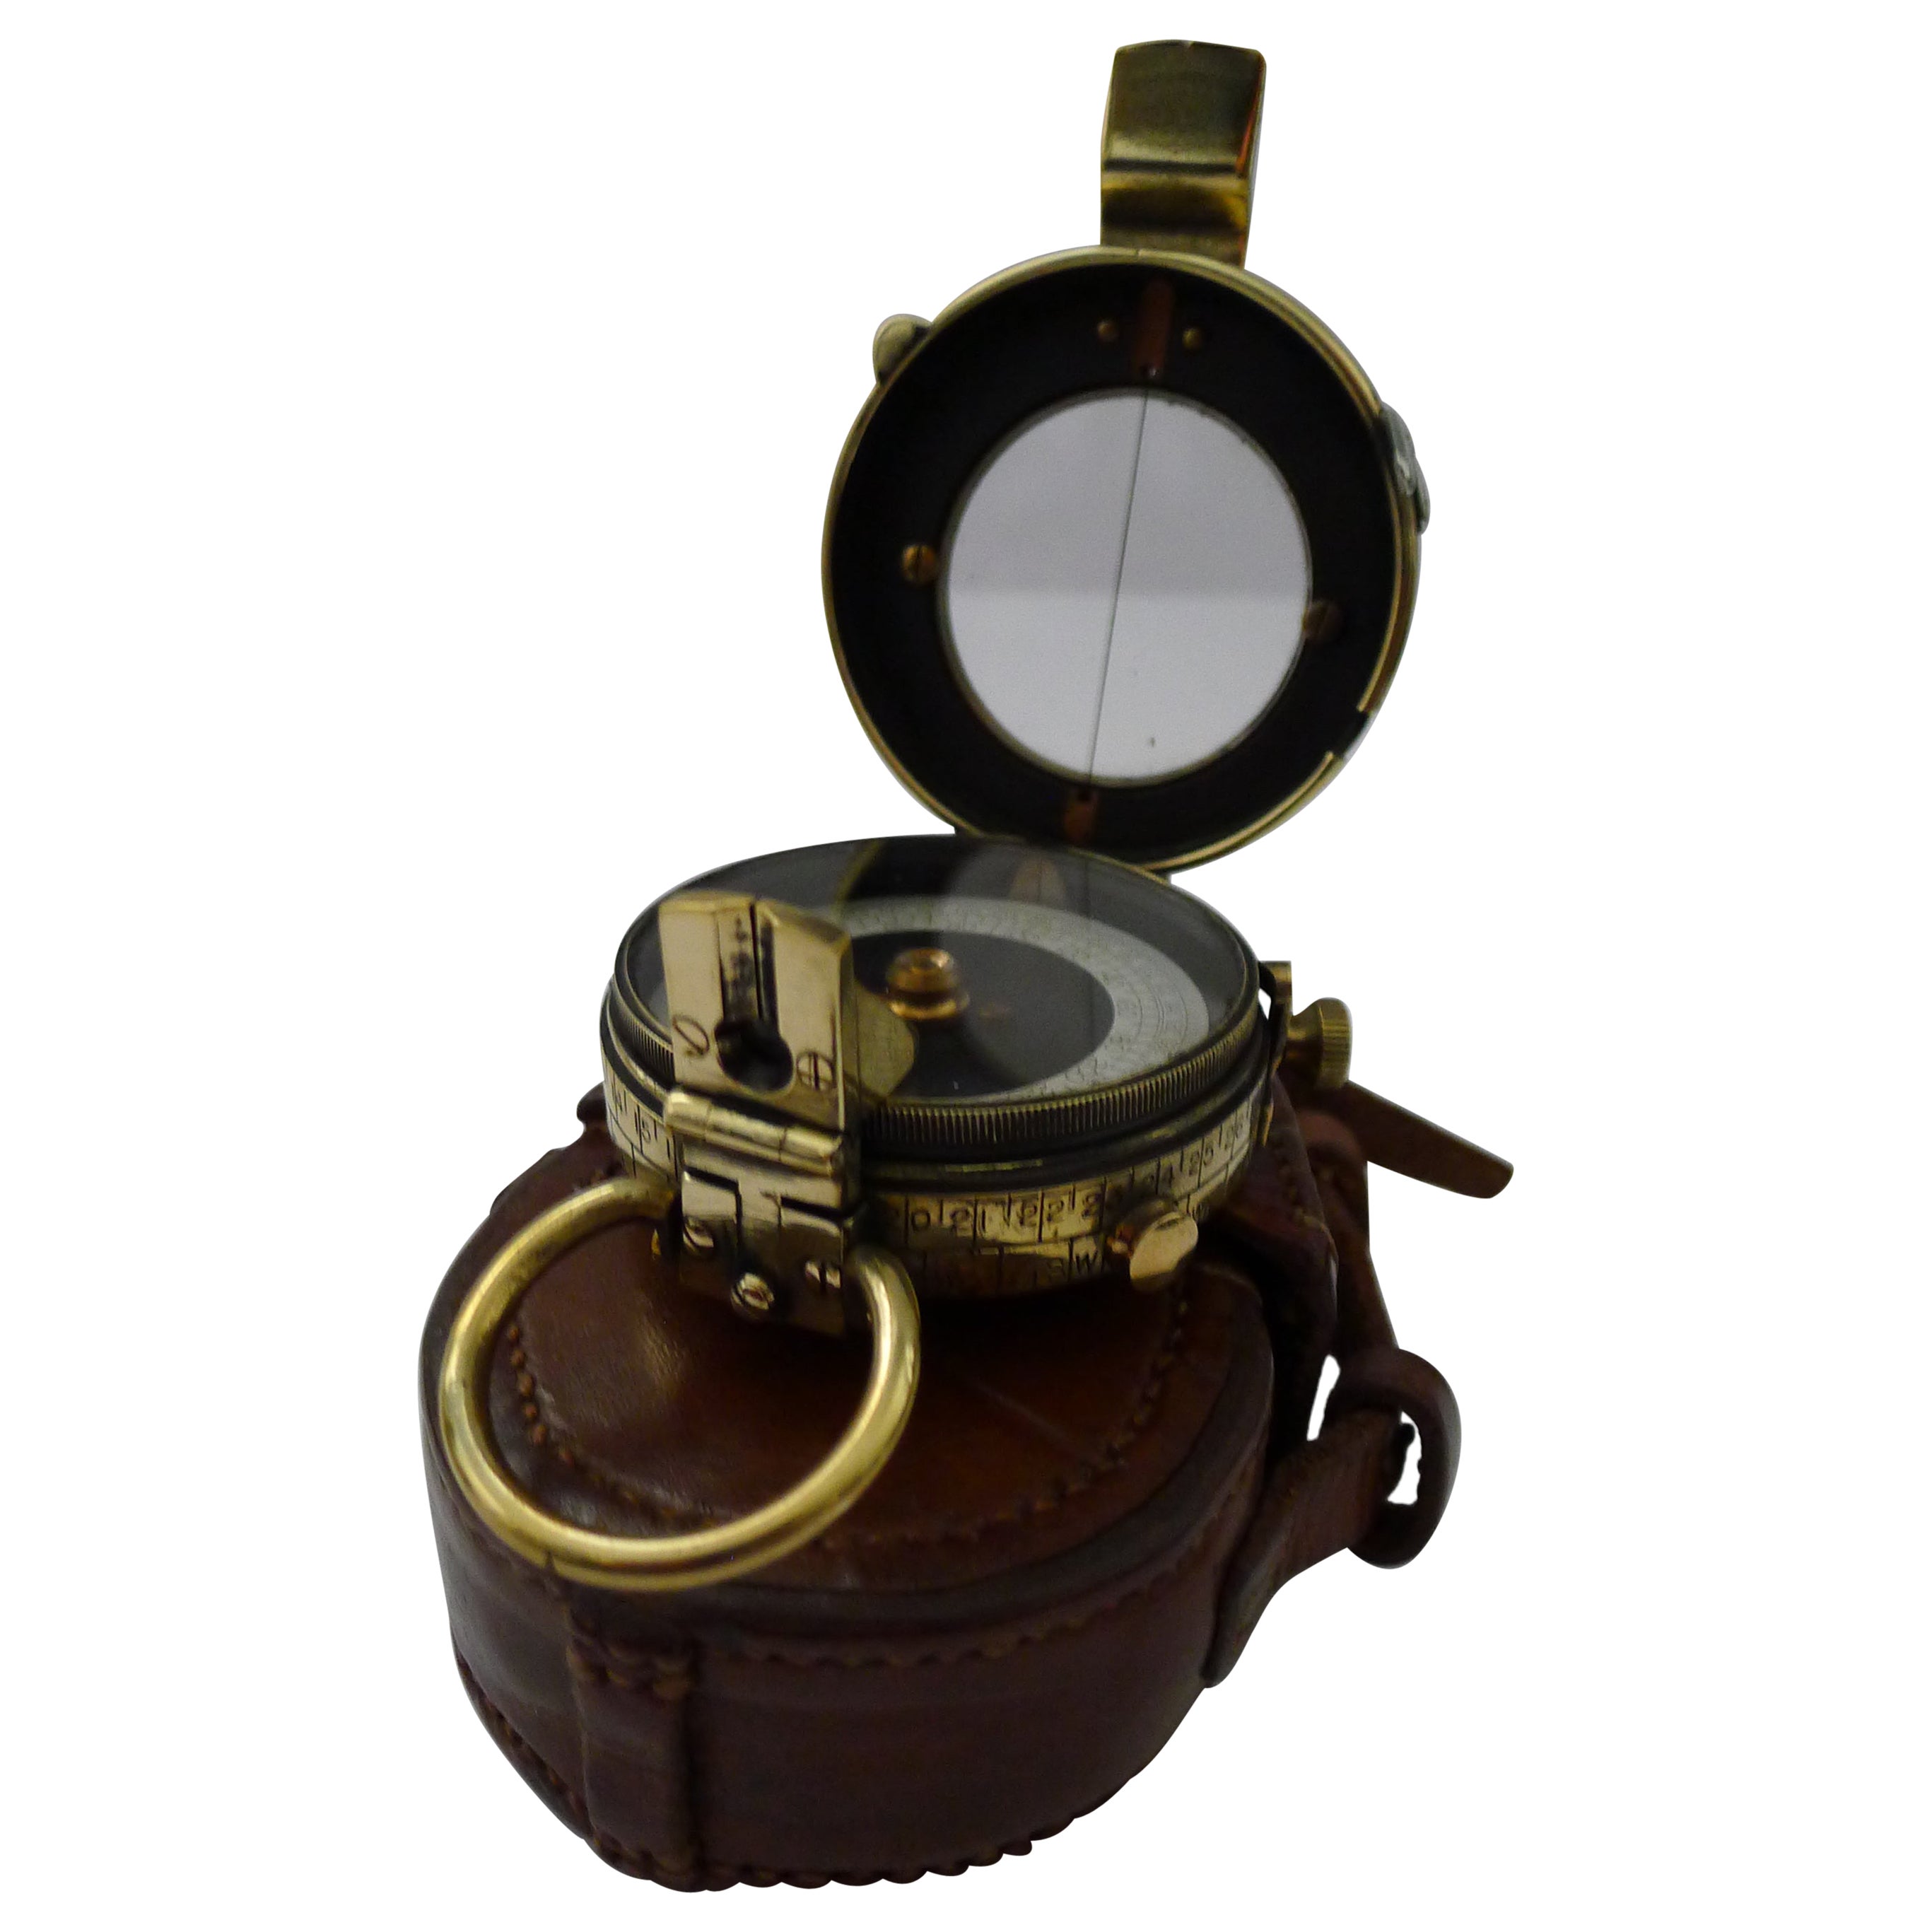 WW1 1918 British Army Officer's Compass - Verner's Patent MK VII by French Ltd.